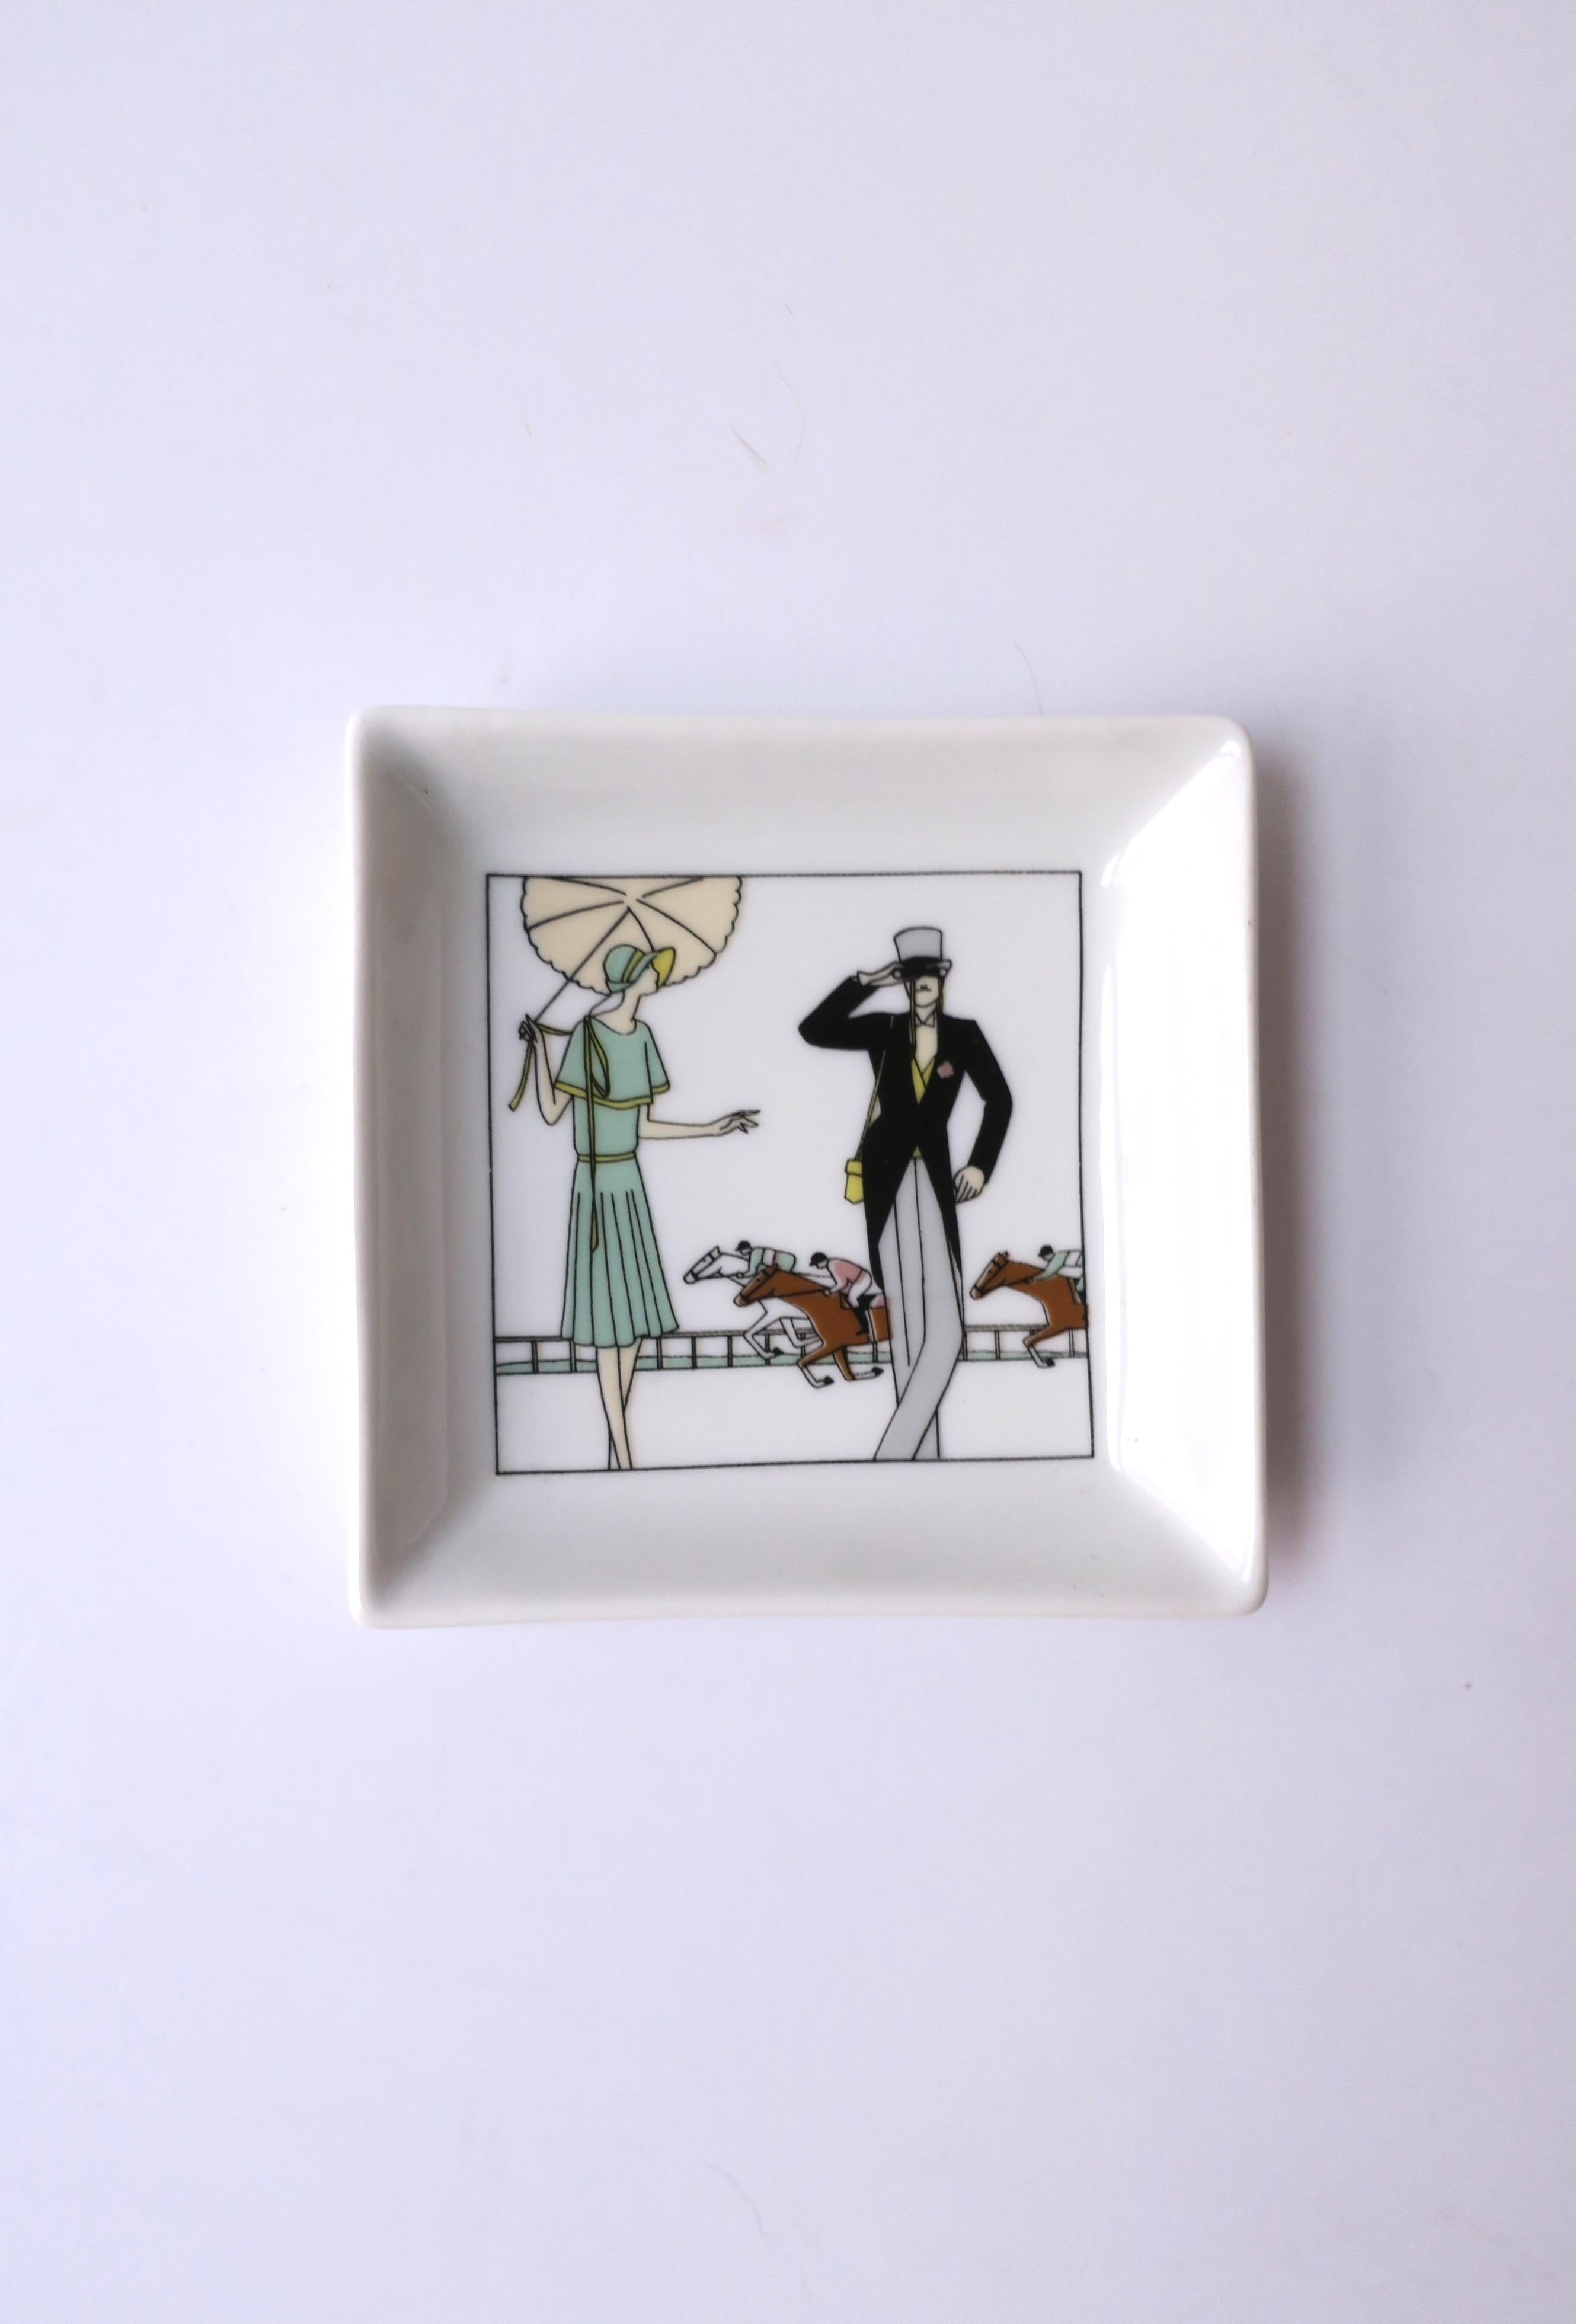 A French porcelain jewelry dish with derby horse racing scene, circa late-20th century, France. A derby racing scene with thoroughbreds and jockey's and a finely dressed woman and man. A great dish to hold jewelry or other items on a nightstand